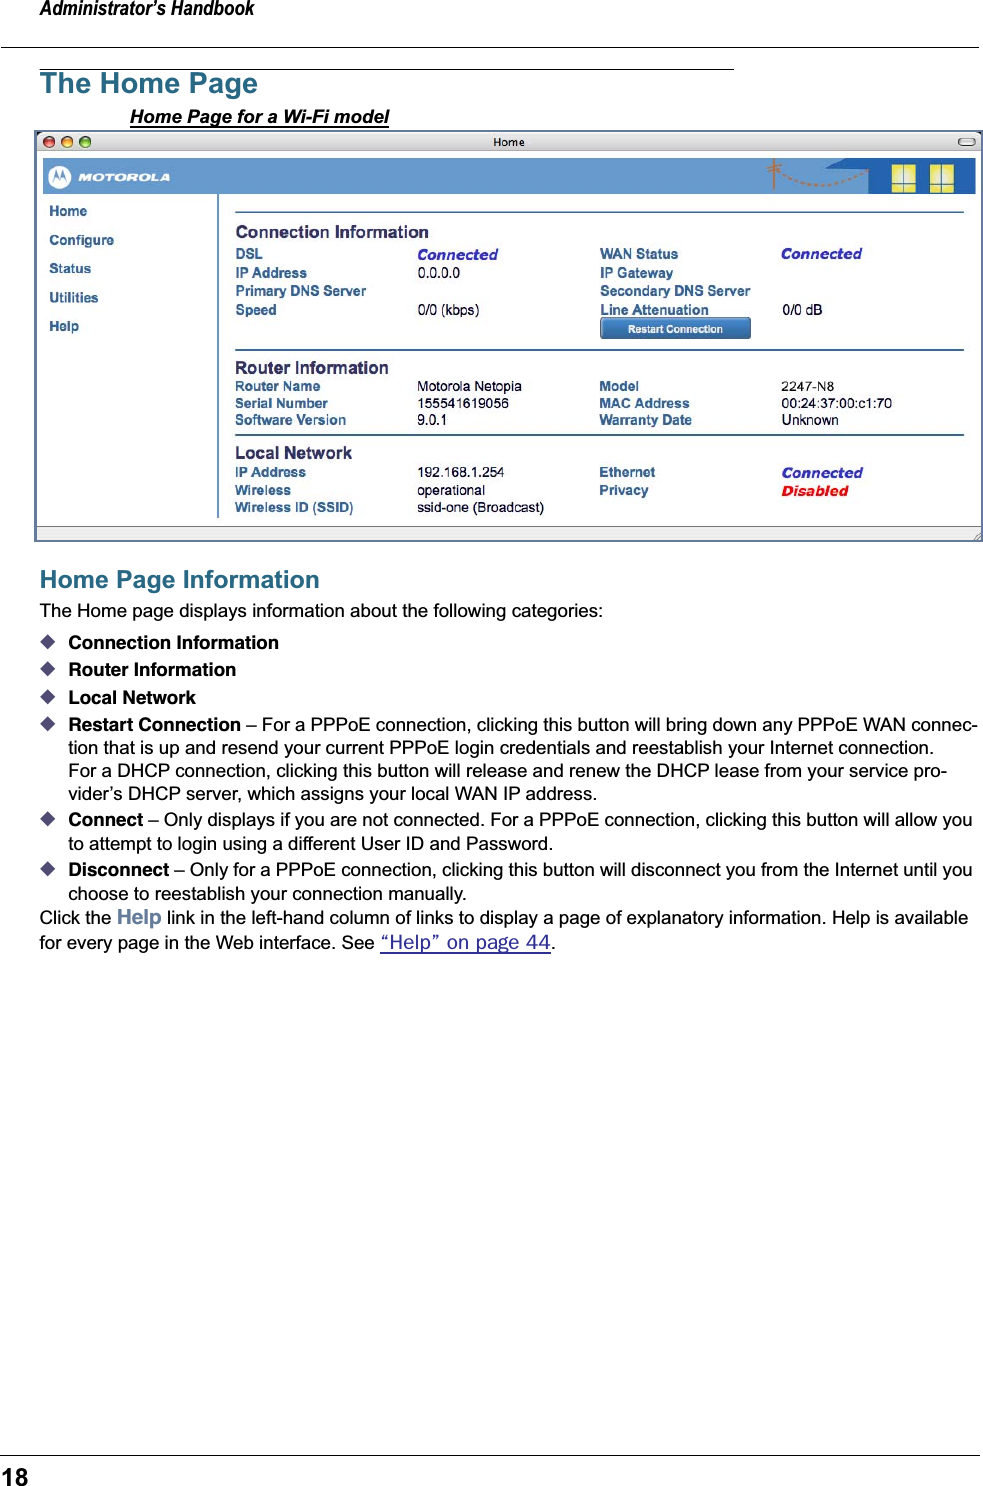 Administrator’s Handbook18The Home PageHome Page for a Wi-Fi modelHome Page InformationThe Home page displays information about the following categories:◆Connection Information◆Router Information◆Local Network◆Restart Connection – For a PPPoE connection, clicking this button will bring down any PPPoE WAN connec-tion that is up and resend your current PPPoE login credentials and reestablish your Internet connection.For a DHCP connection, clicking this button will release and renew the DHCP lease from your service pro-vider’s DHCP server, which assigns your local WAN IP address.◆Connect – Only displays if you are not connected. For a PPPoE connection, clicking this button will allow you to attempt to login using a different User ID and Password.◆Disconnect – Only for a PPPoE connection, clicking this button will disconnect you from the Internet until you choose to reestablish your connection manually.Click the Help link in the left-hand column of links to display a page of explanatory information. Help is available for every page in the Web interface. See “Help” on page 44.